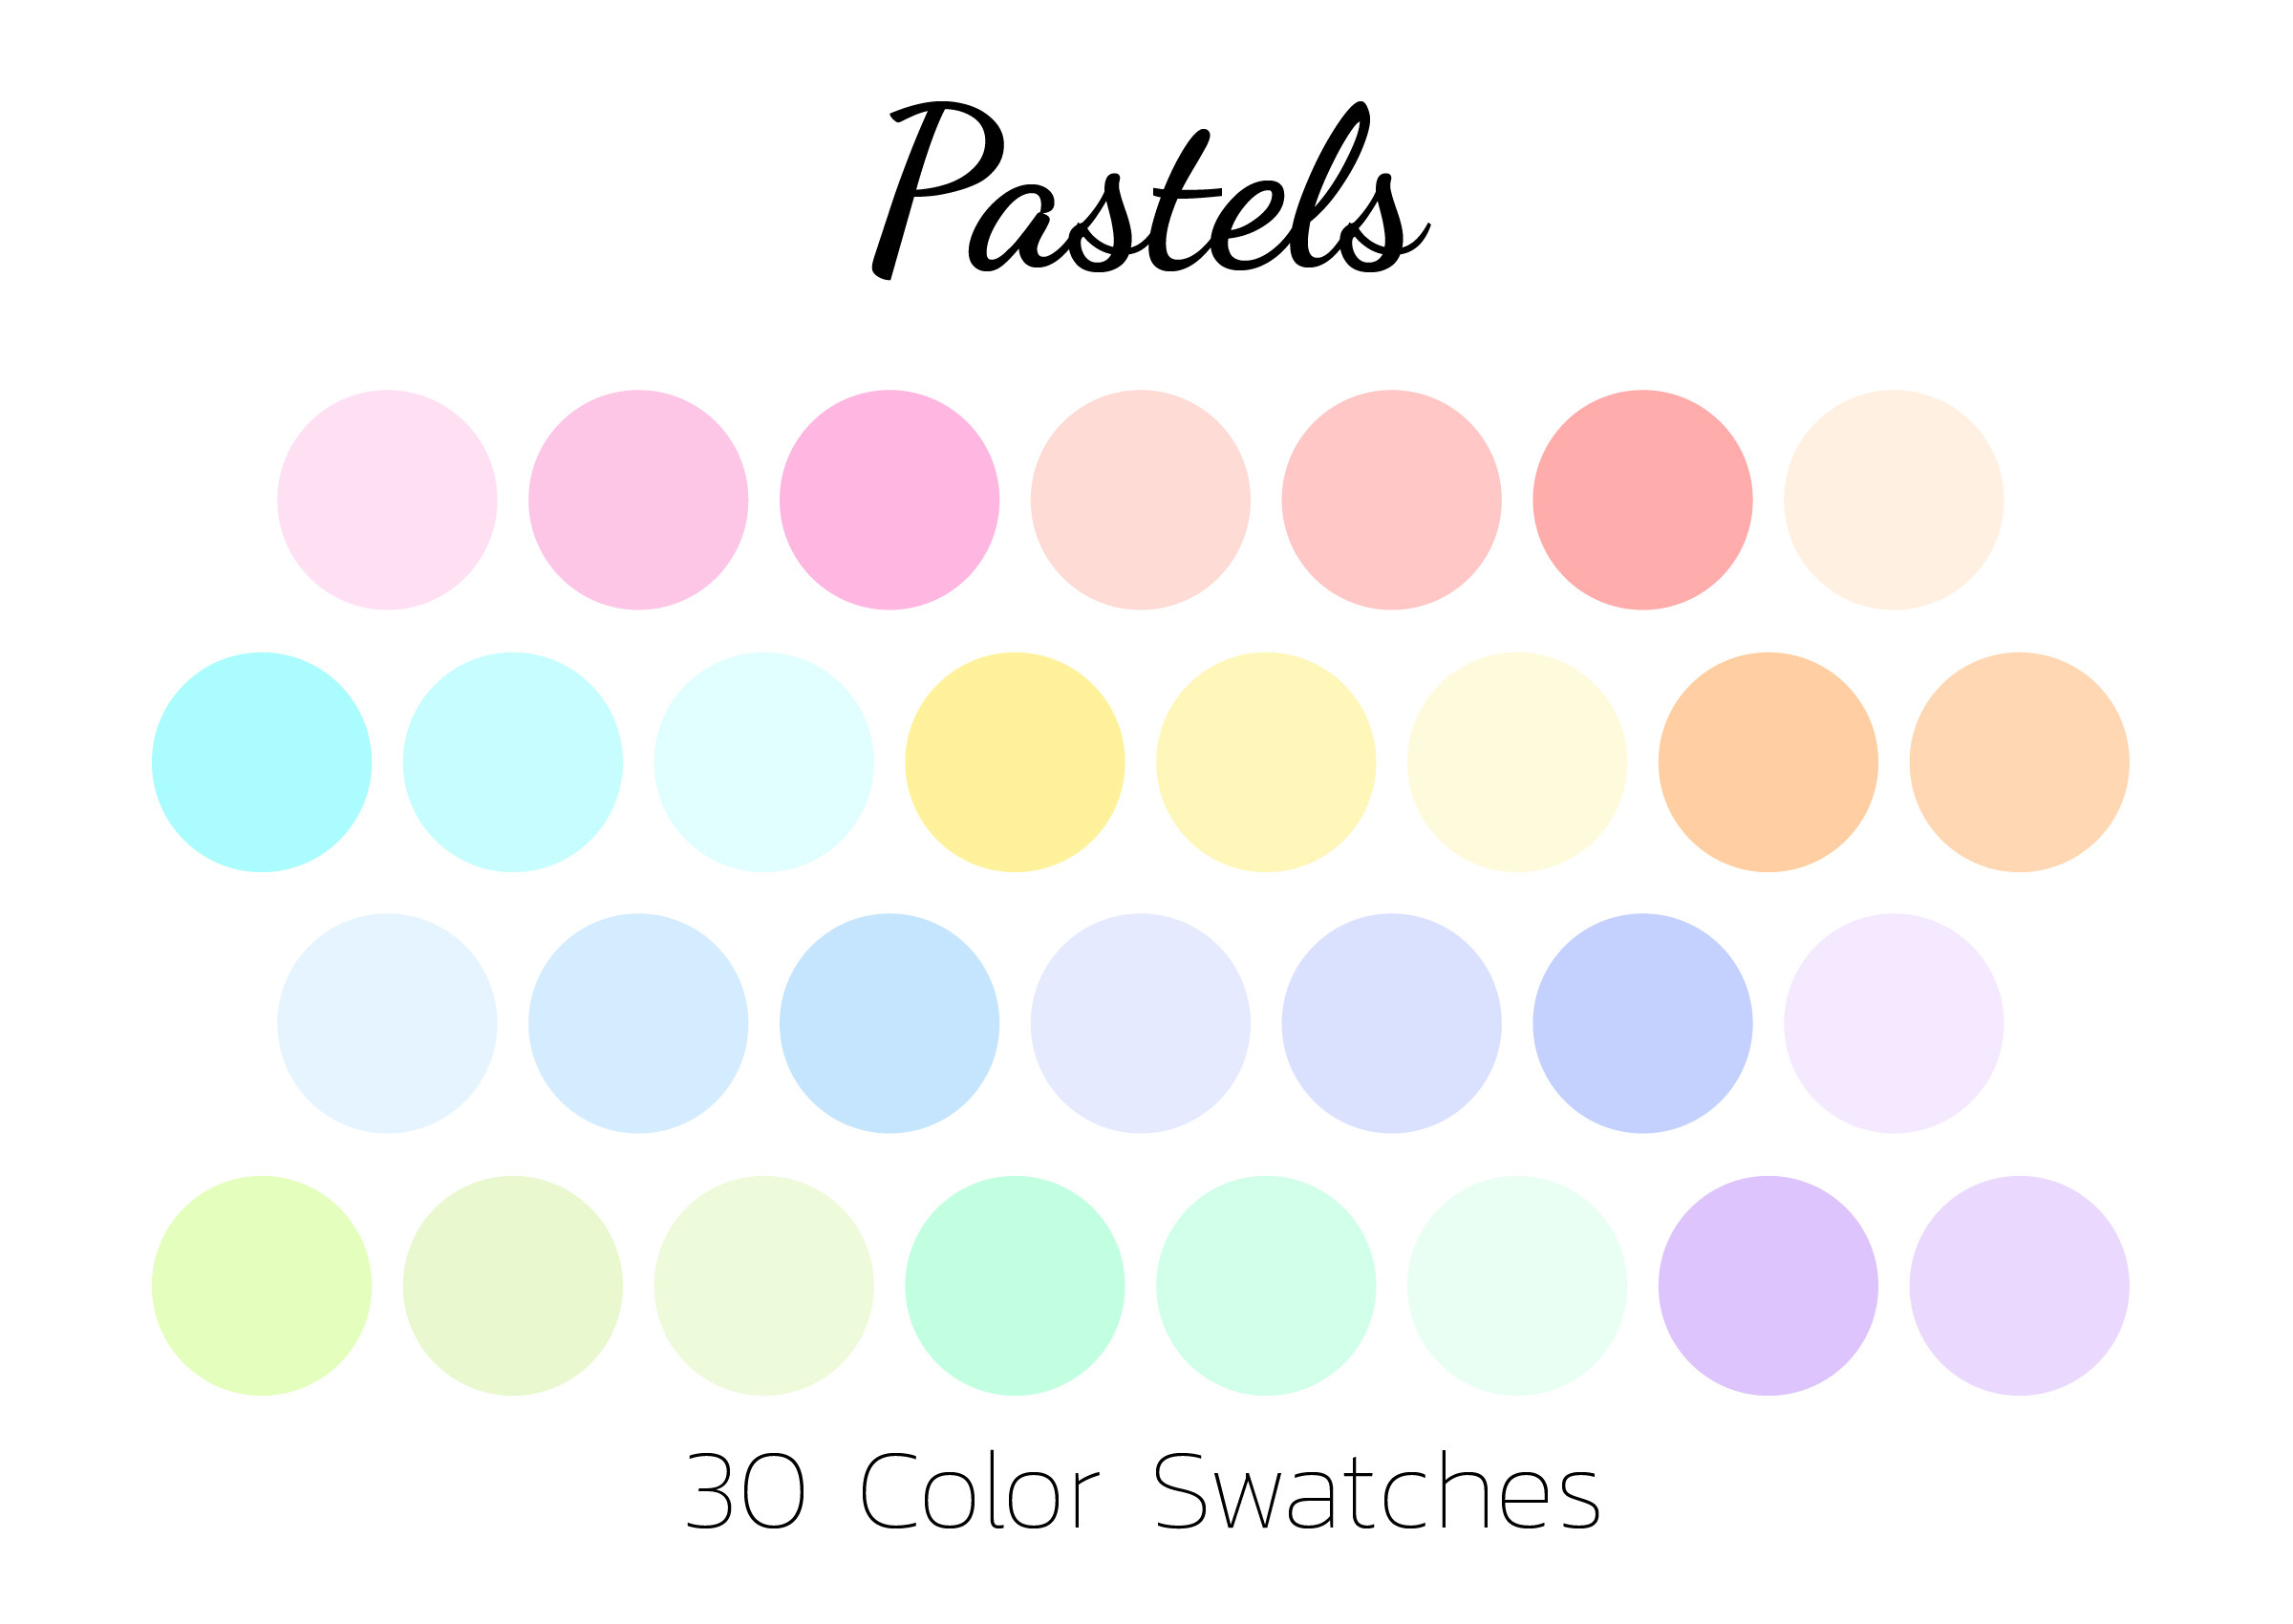 https://www.creativefabrica.com/wp-content/uploads/2021/05/30/Color-Palette-Swatches-Pastels-Graphics-12669798-1.jpg